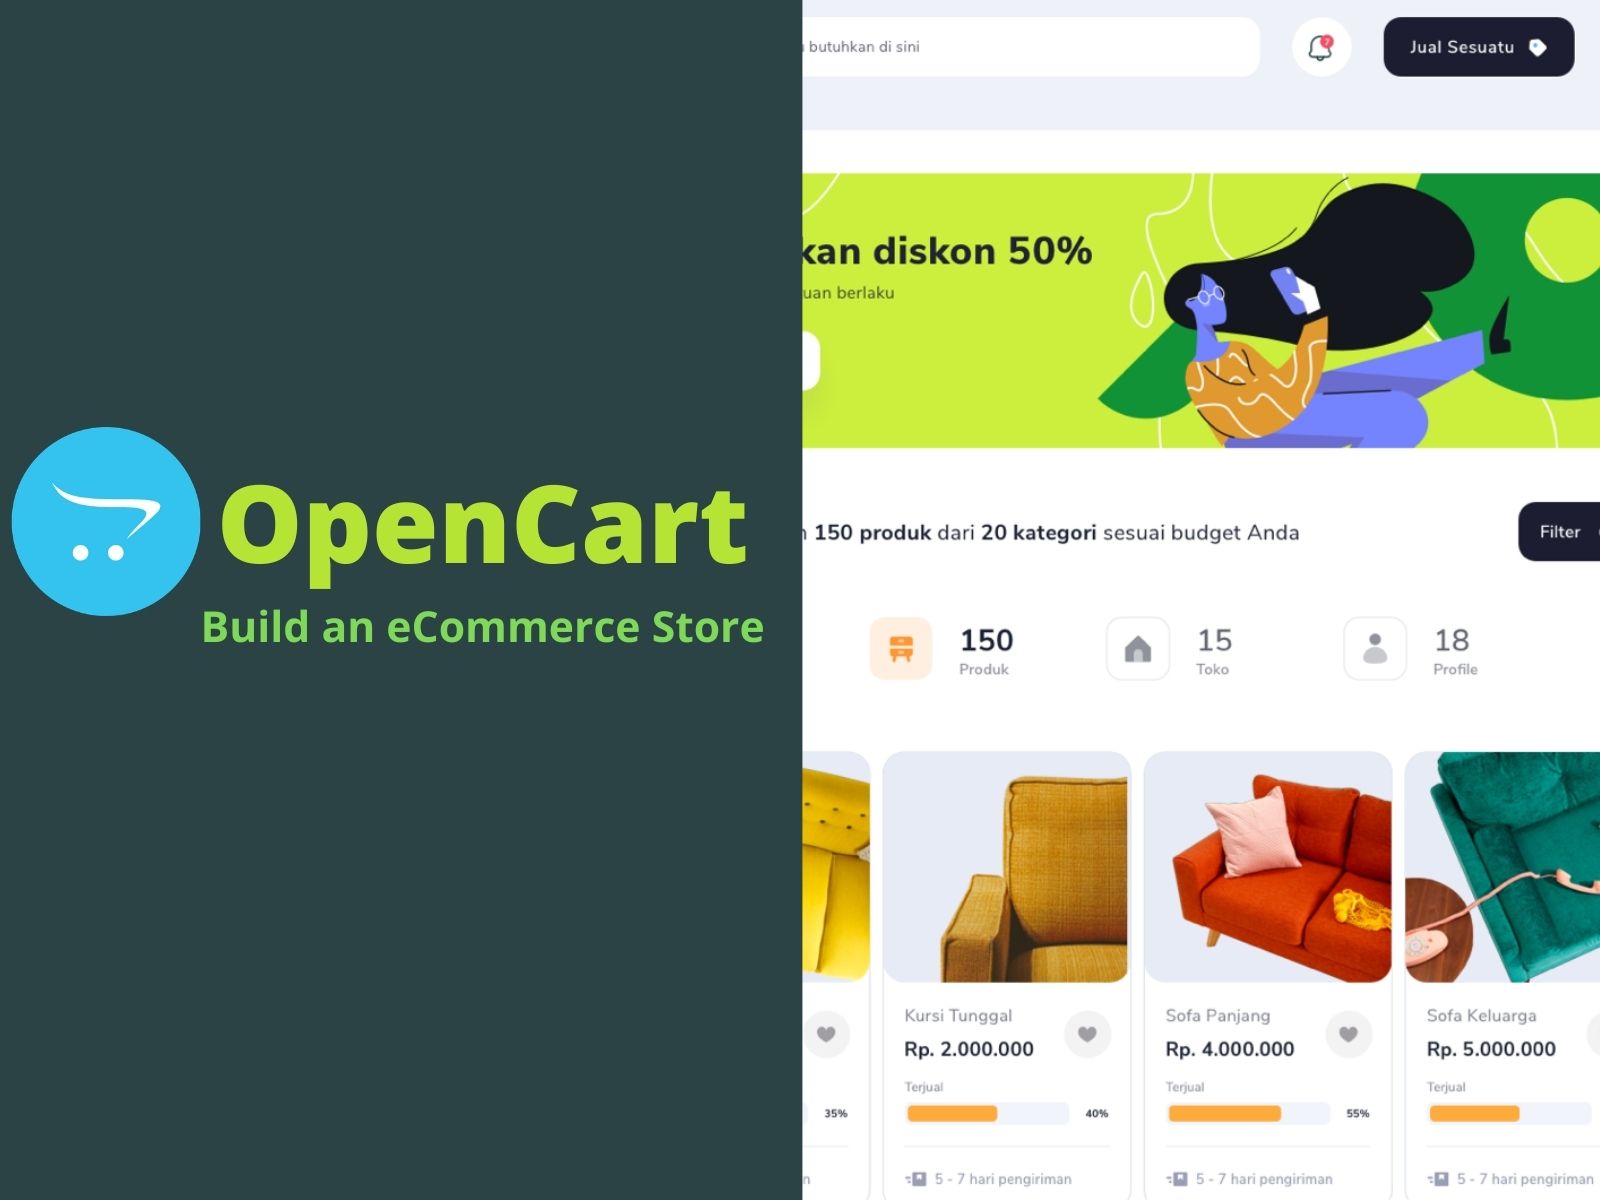 OpenCart build an ecommerce store